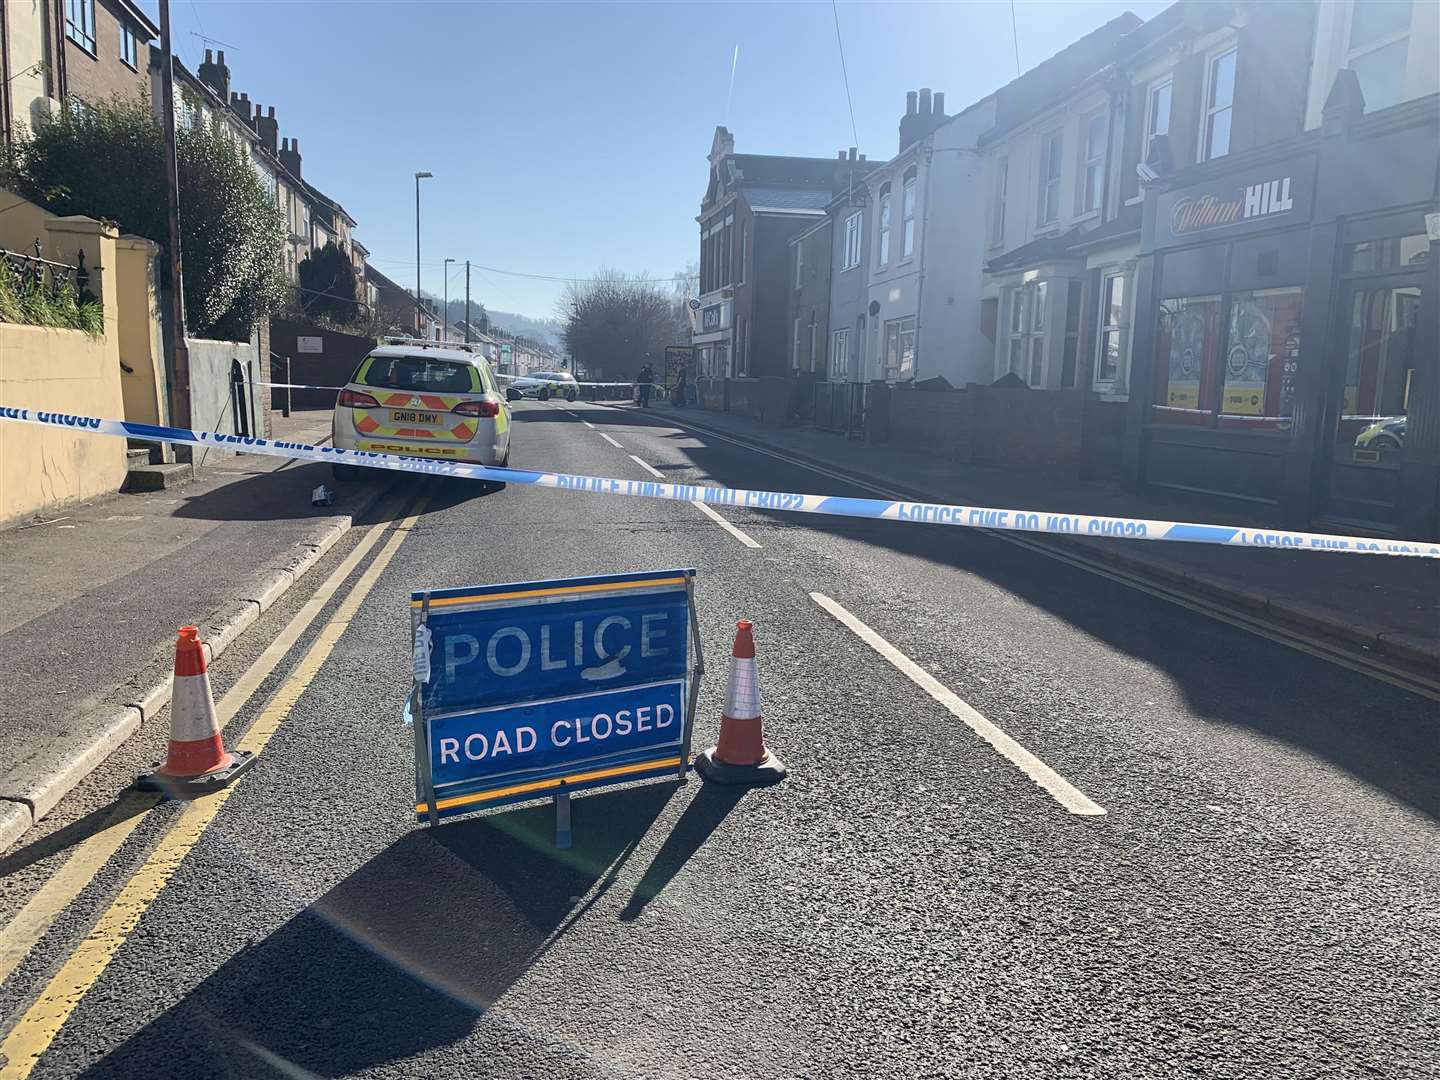 Luton Road, Chatham was closed this morning but has since been reopened.